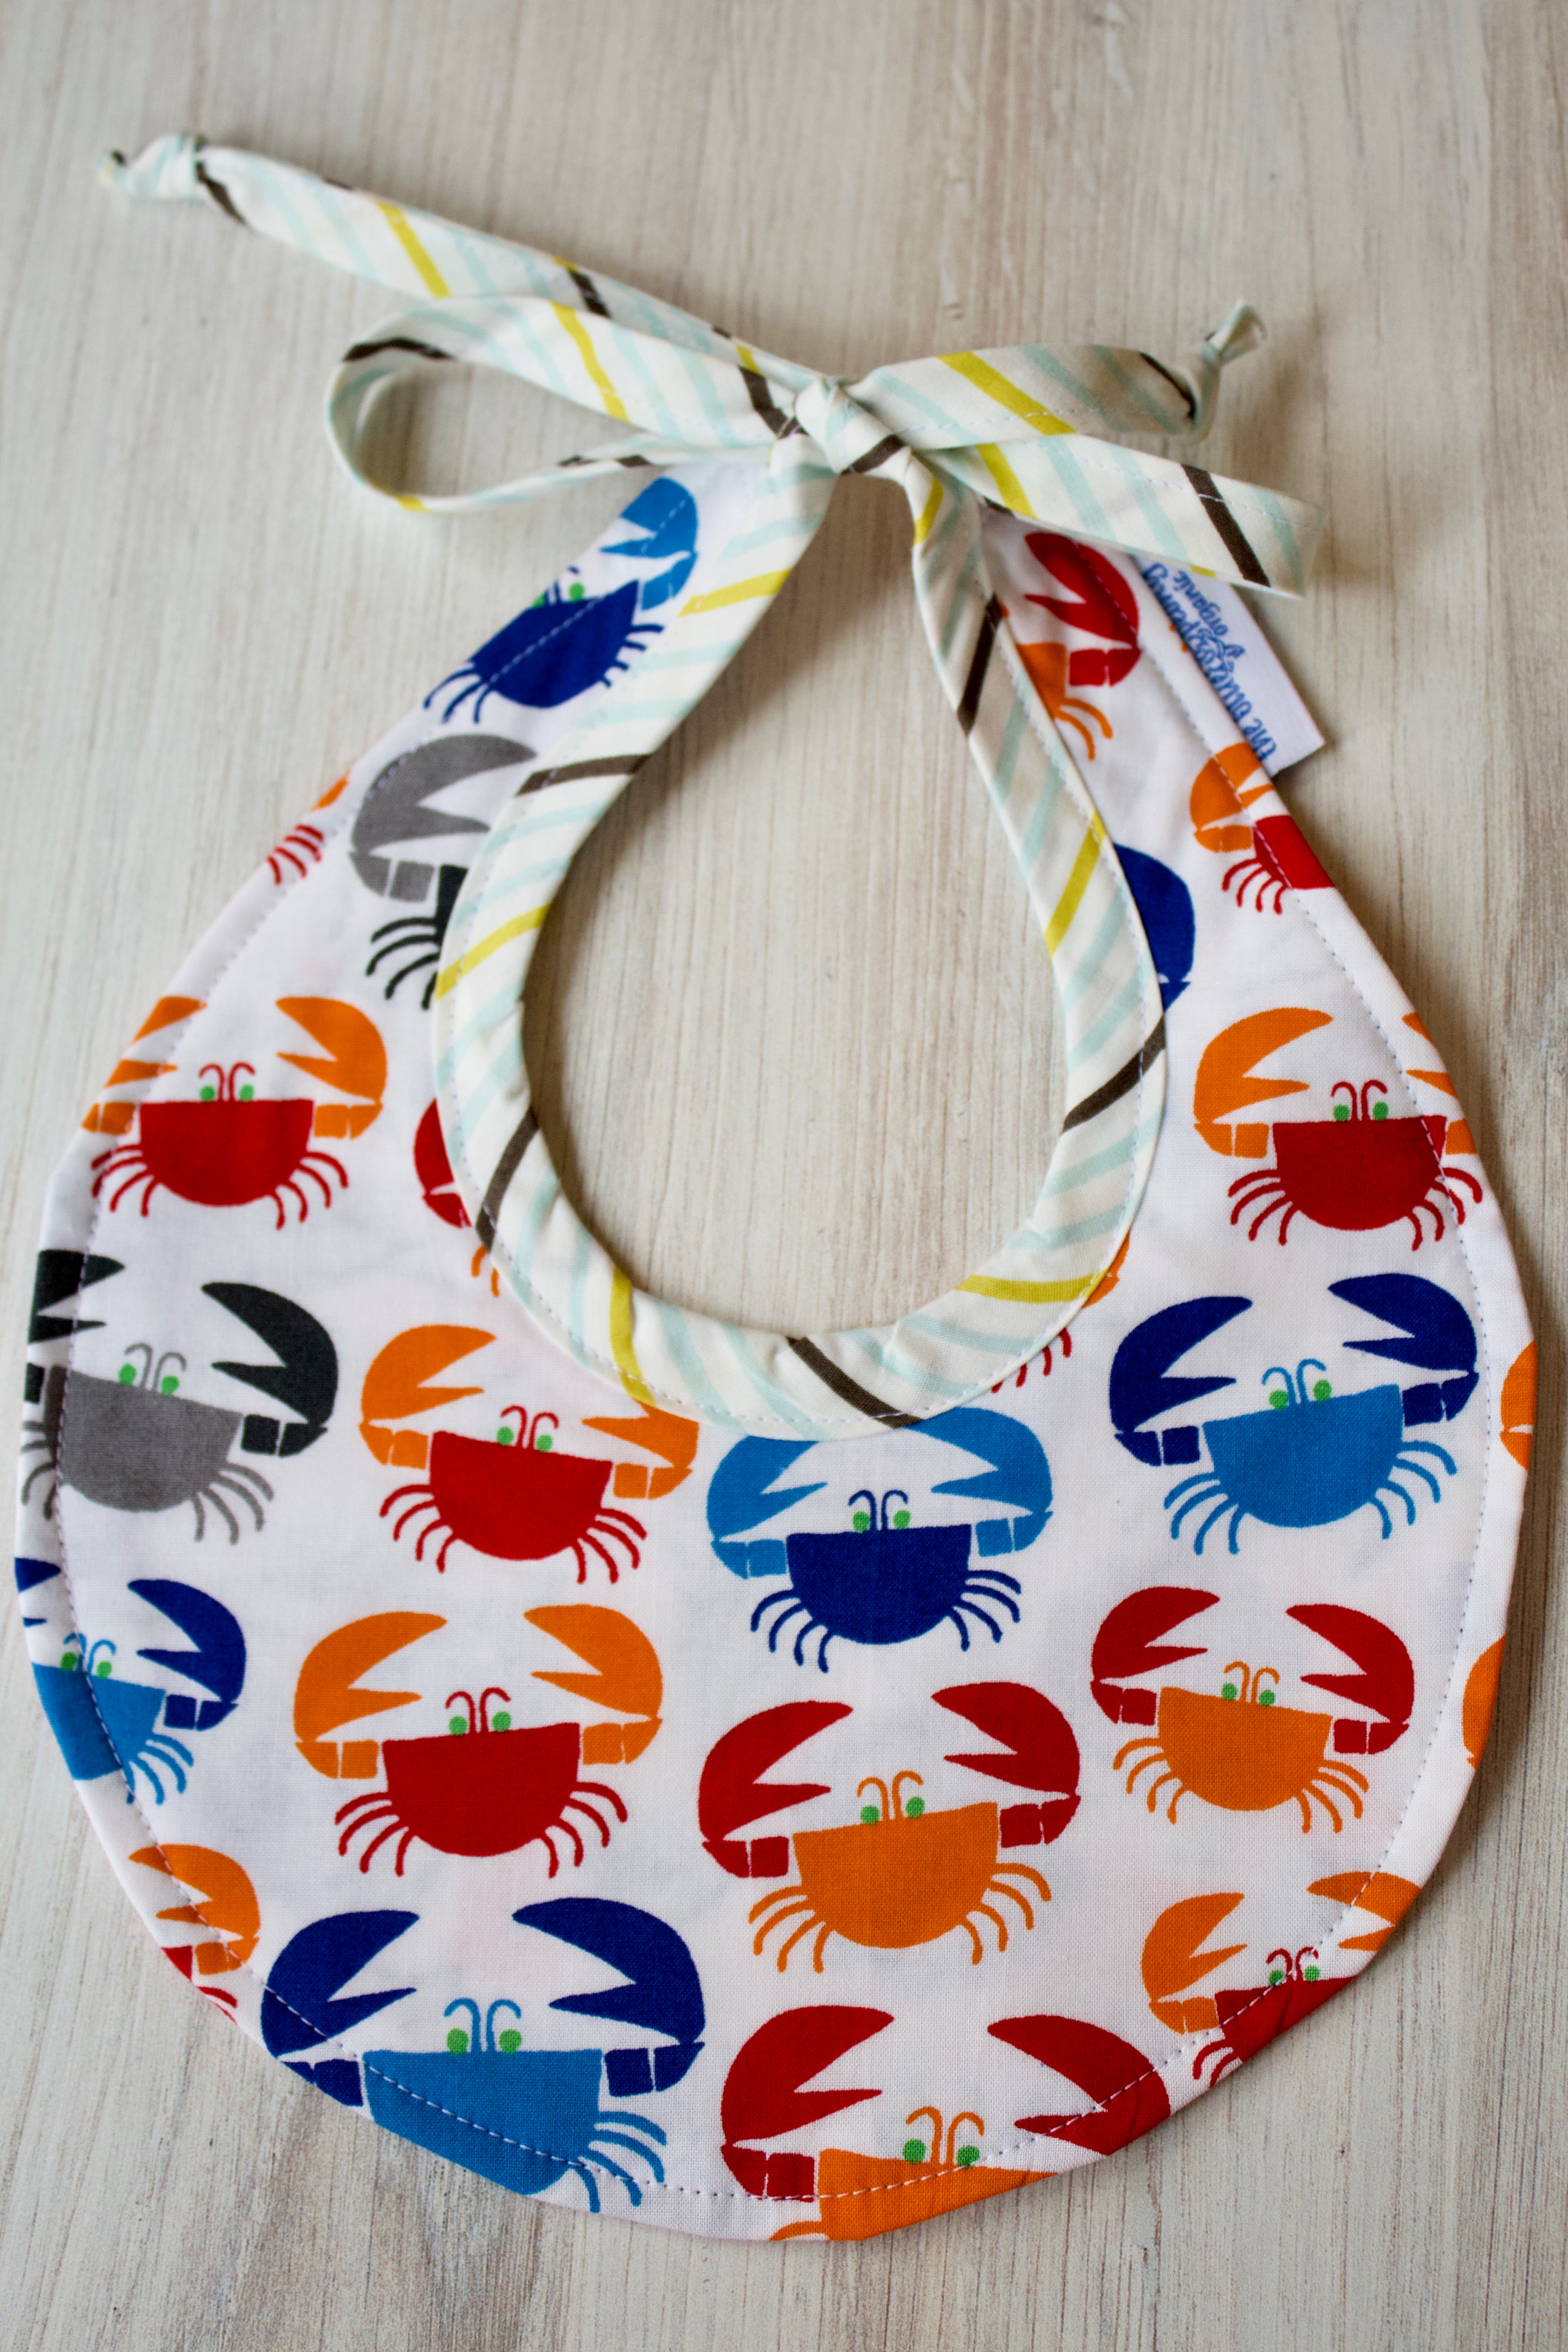 Shelly the Crab Bib-The Blue Peony-Animal_Crab,Category_Bib,Color_Blue,Color_Orange,Color_Red,Department_Organic Baby,Material_Organic Cotton,Pattern_Ed Emberley's Animals,Theme_Animal,Theme_Water Life